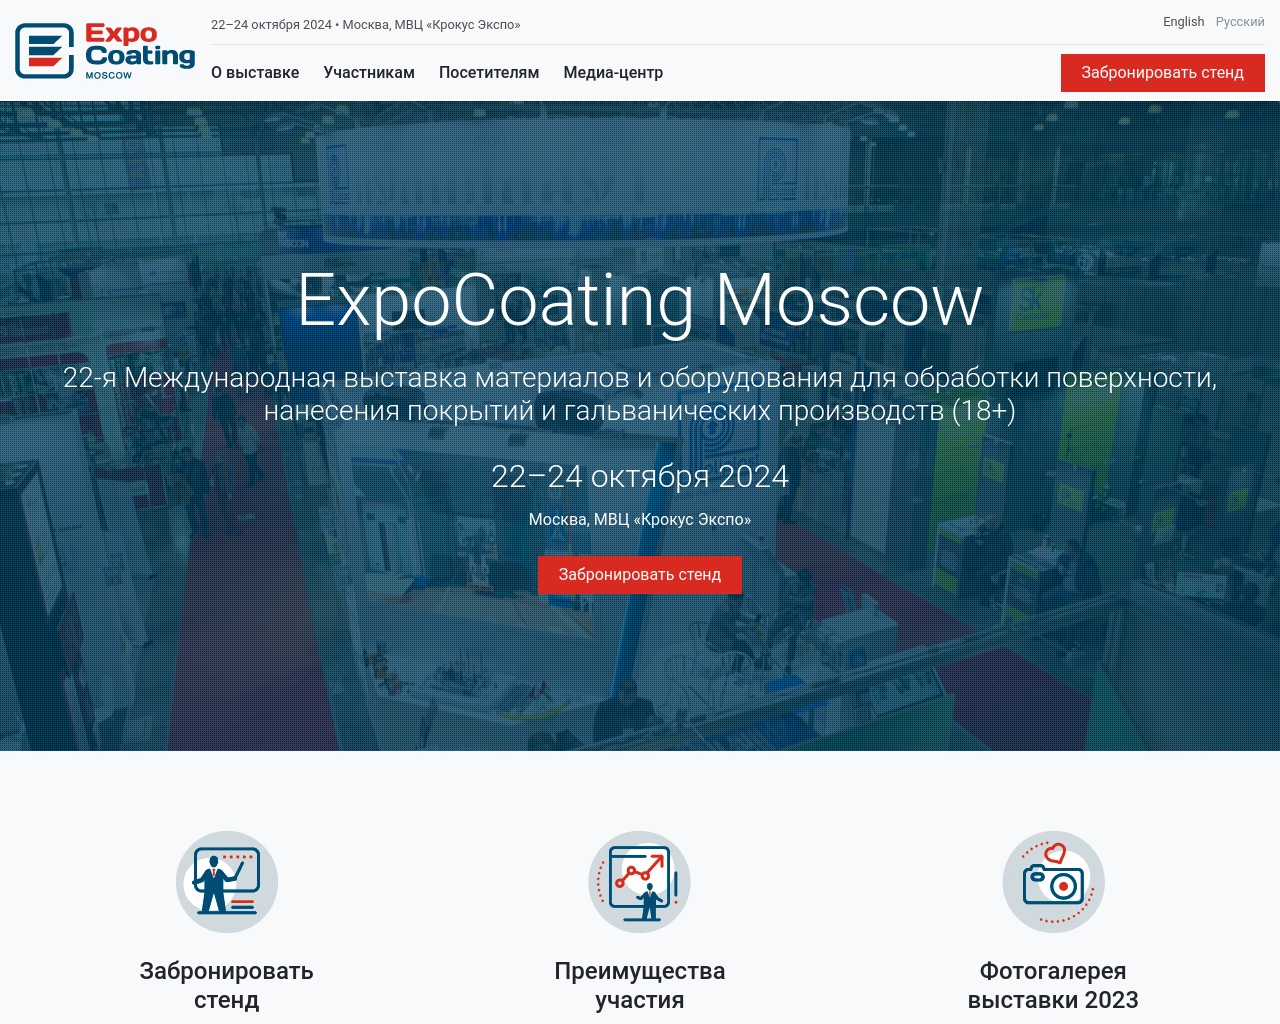 expocoating-moscow.ru